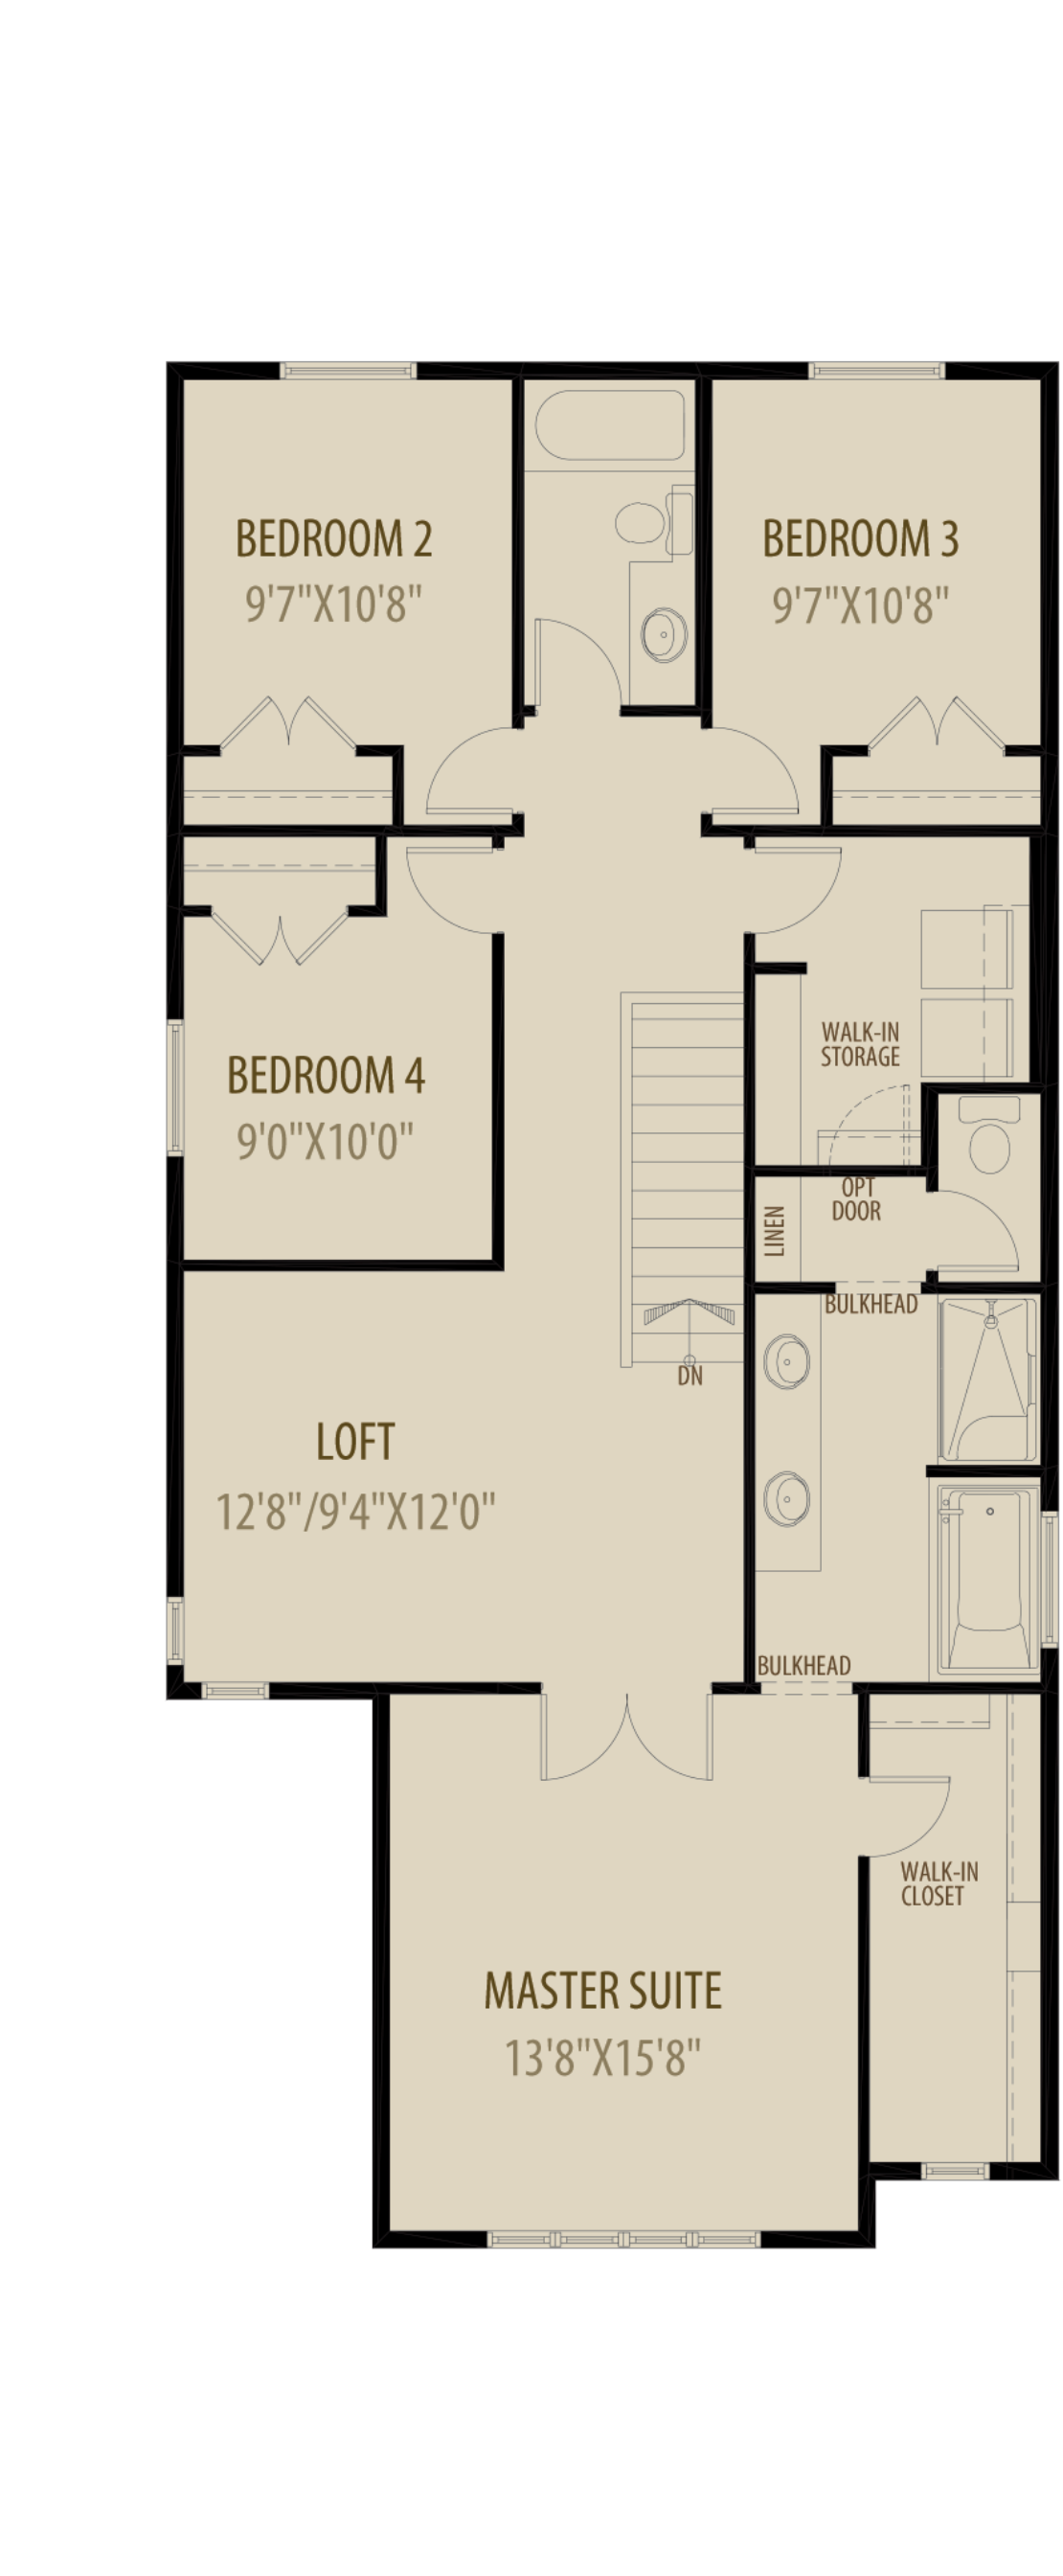 Revised Upper Floor 3 With 4Th Bedroom (Adds 60 Sq Ft)